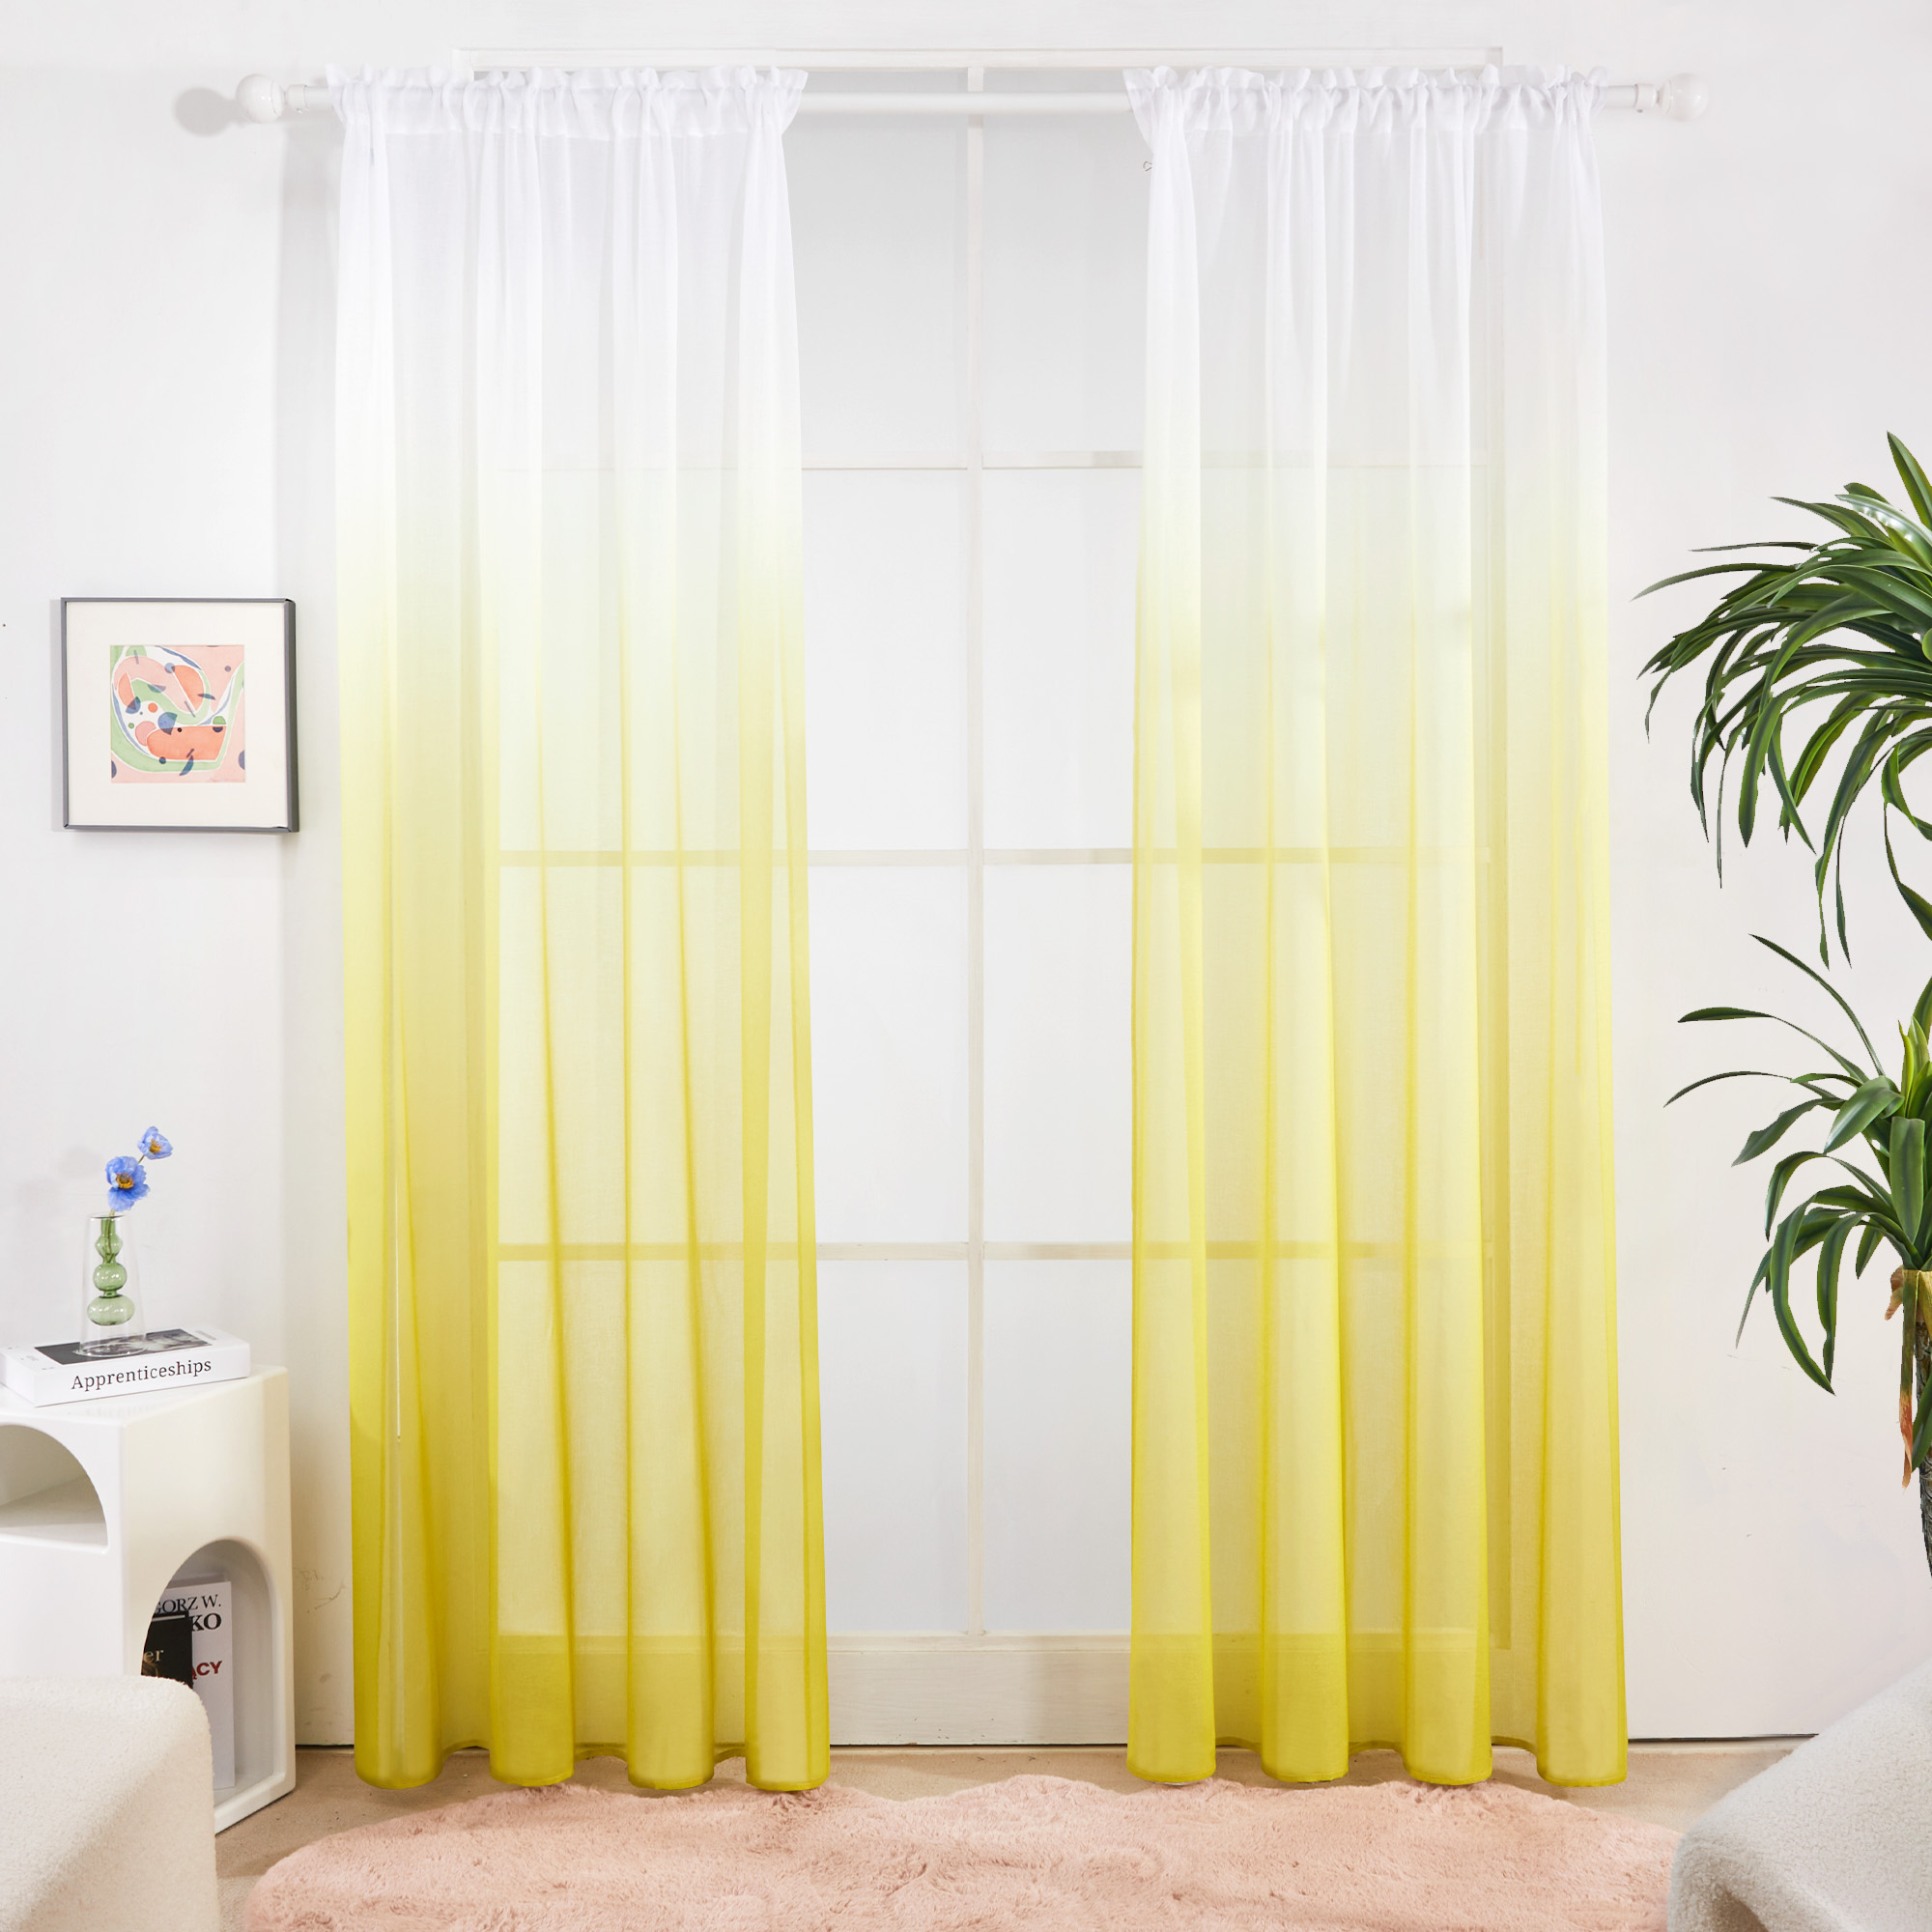 2-PK Deconovo Rod Pocket Gradient Sheer Curtains -$8.37~$11.56 + Free Shipping w/ Prime or orders $25+